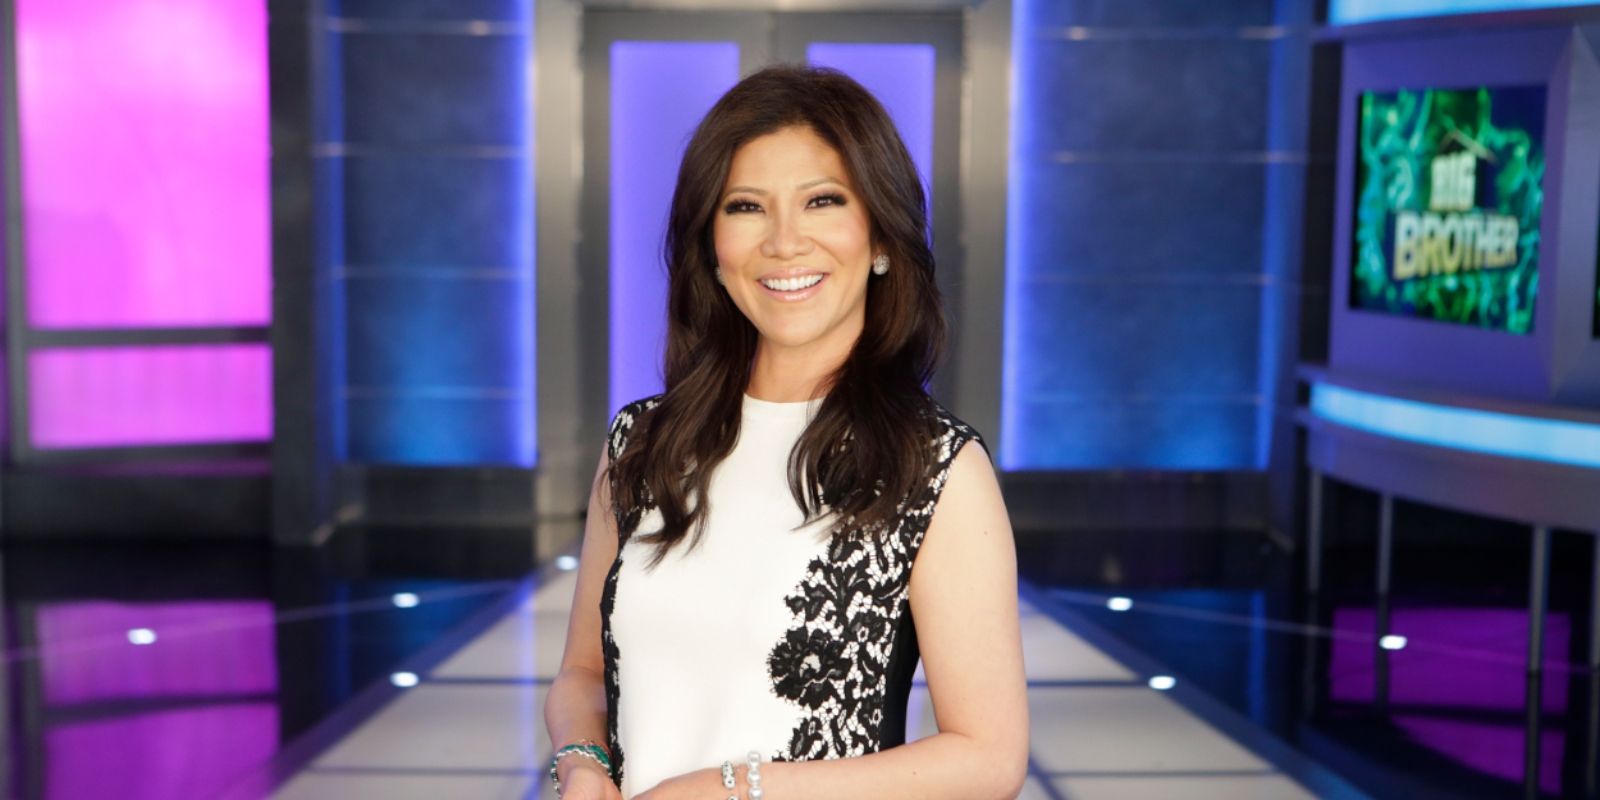 Big Brother Julie Chen on set wearing black and white dress smiling